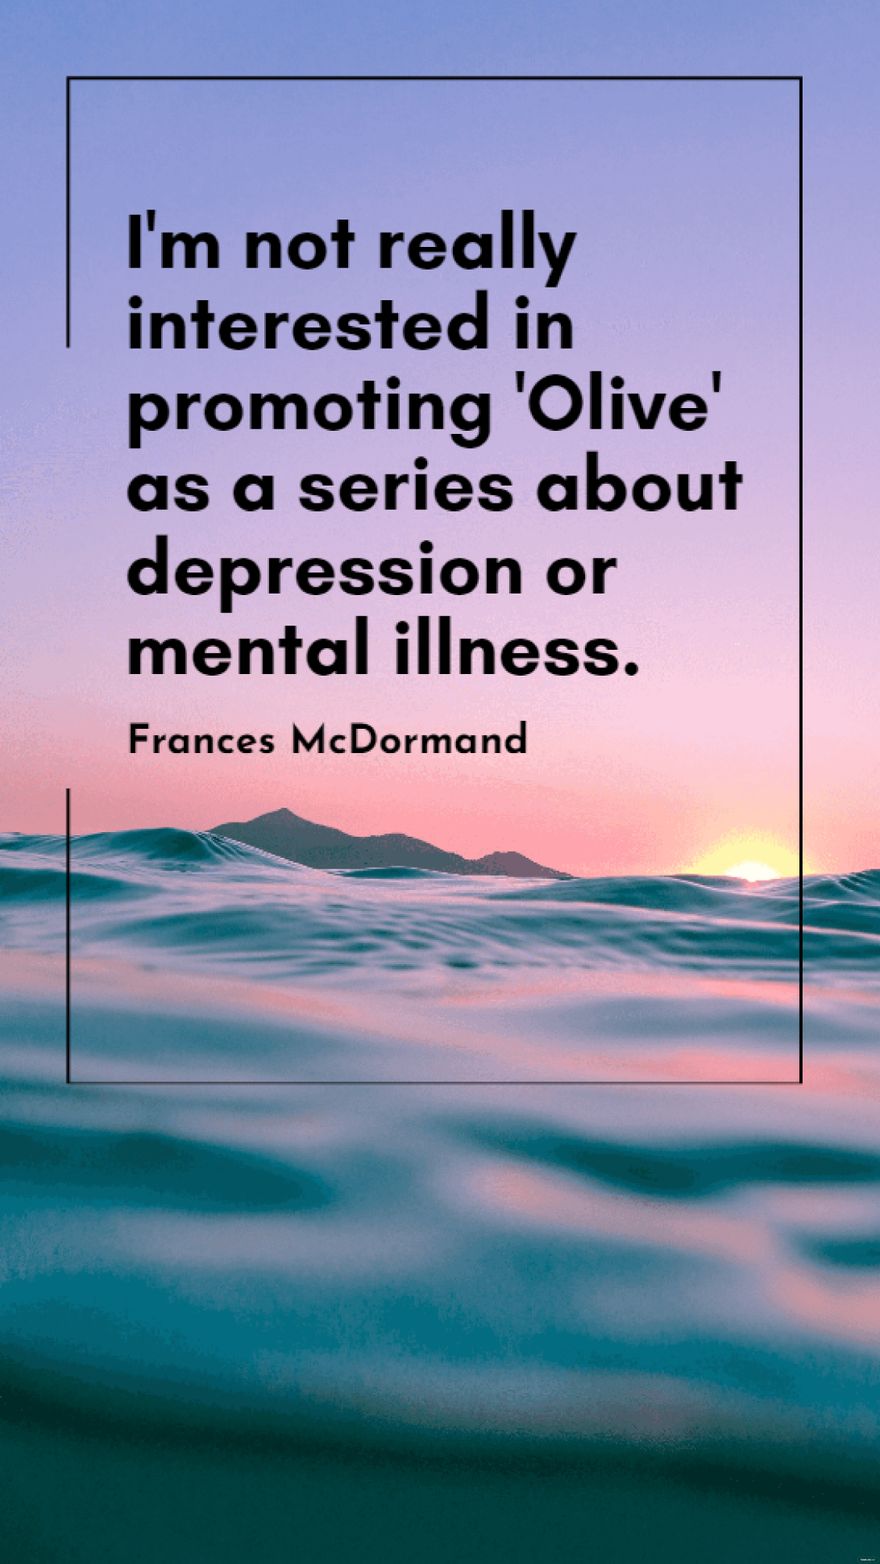 Frances McDormand - I'm not really interested in promoting 'Olive' as a series about depression or mental illness.